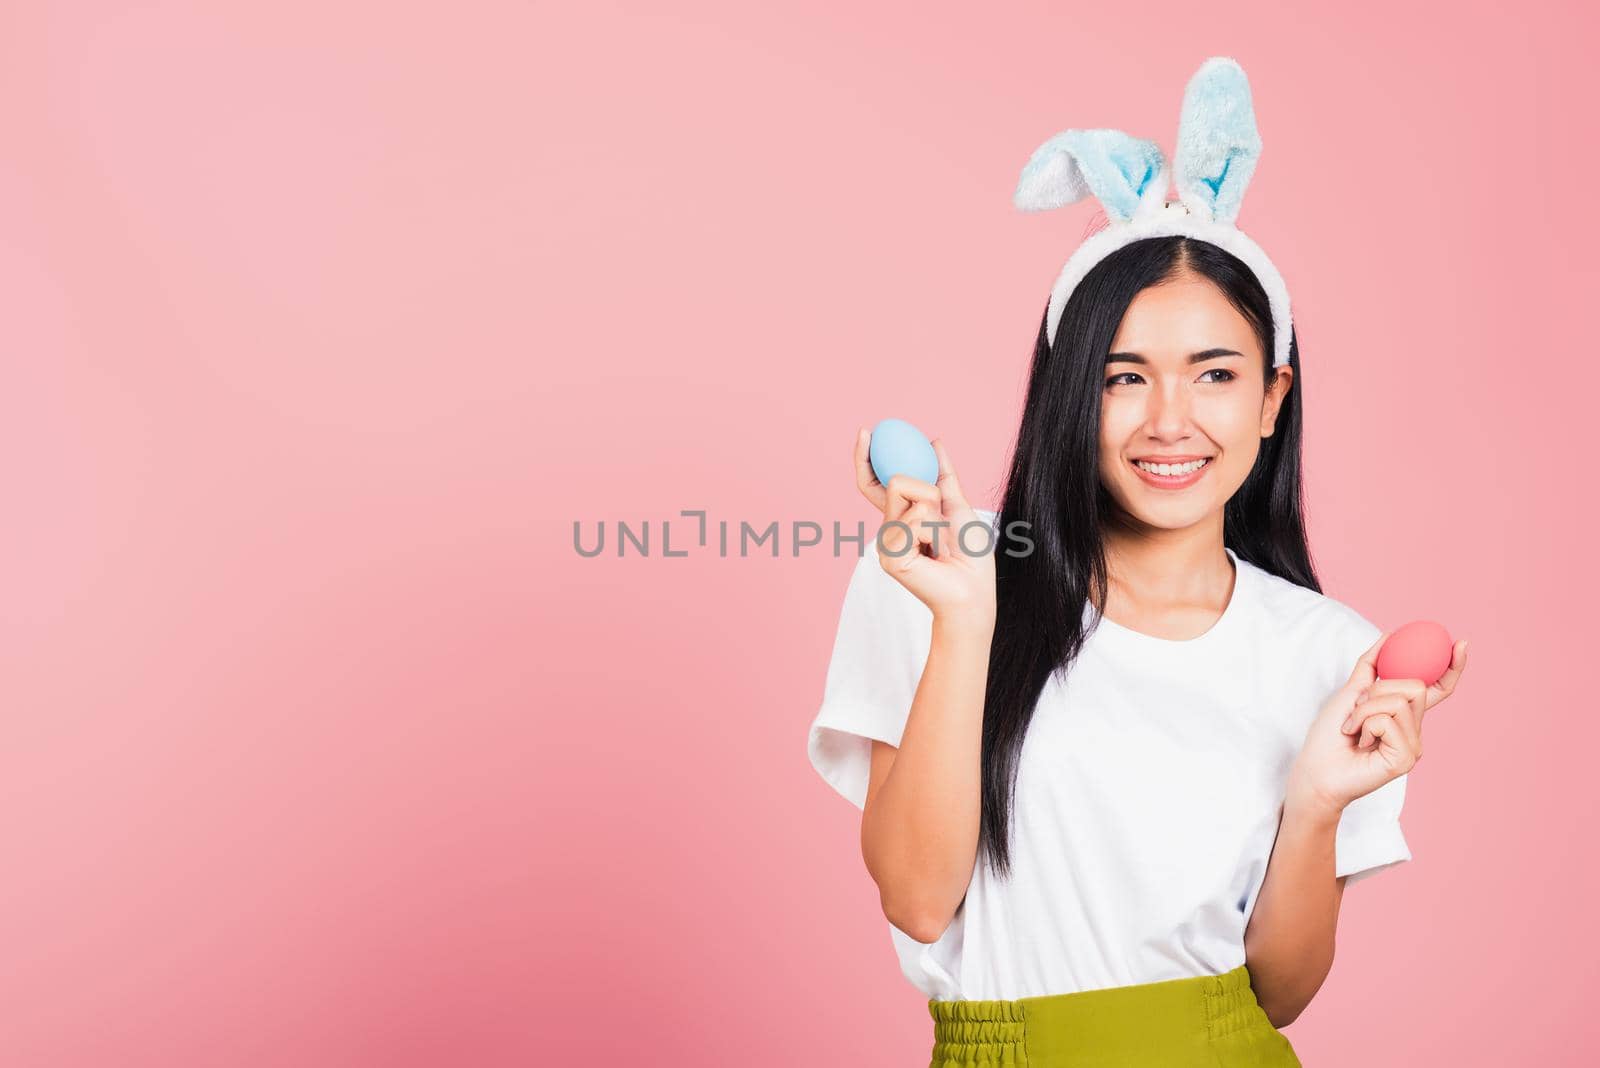 Happy Easter concept. Beautiful young woman smiling wearing rabbit ears holding colorful Easter eggs gift on hands, Portrait female looking at side away, studio shot isolated on pink background